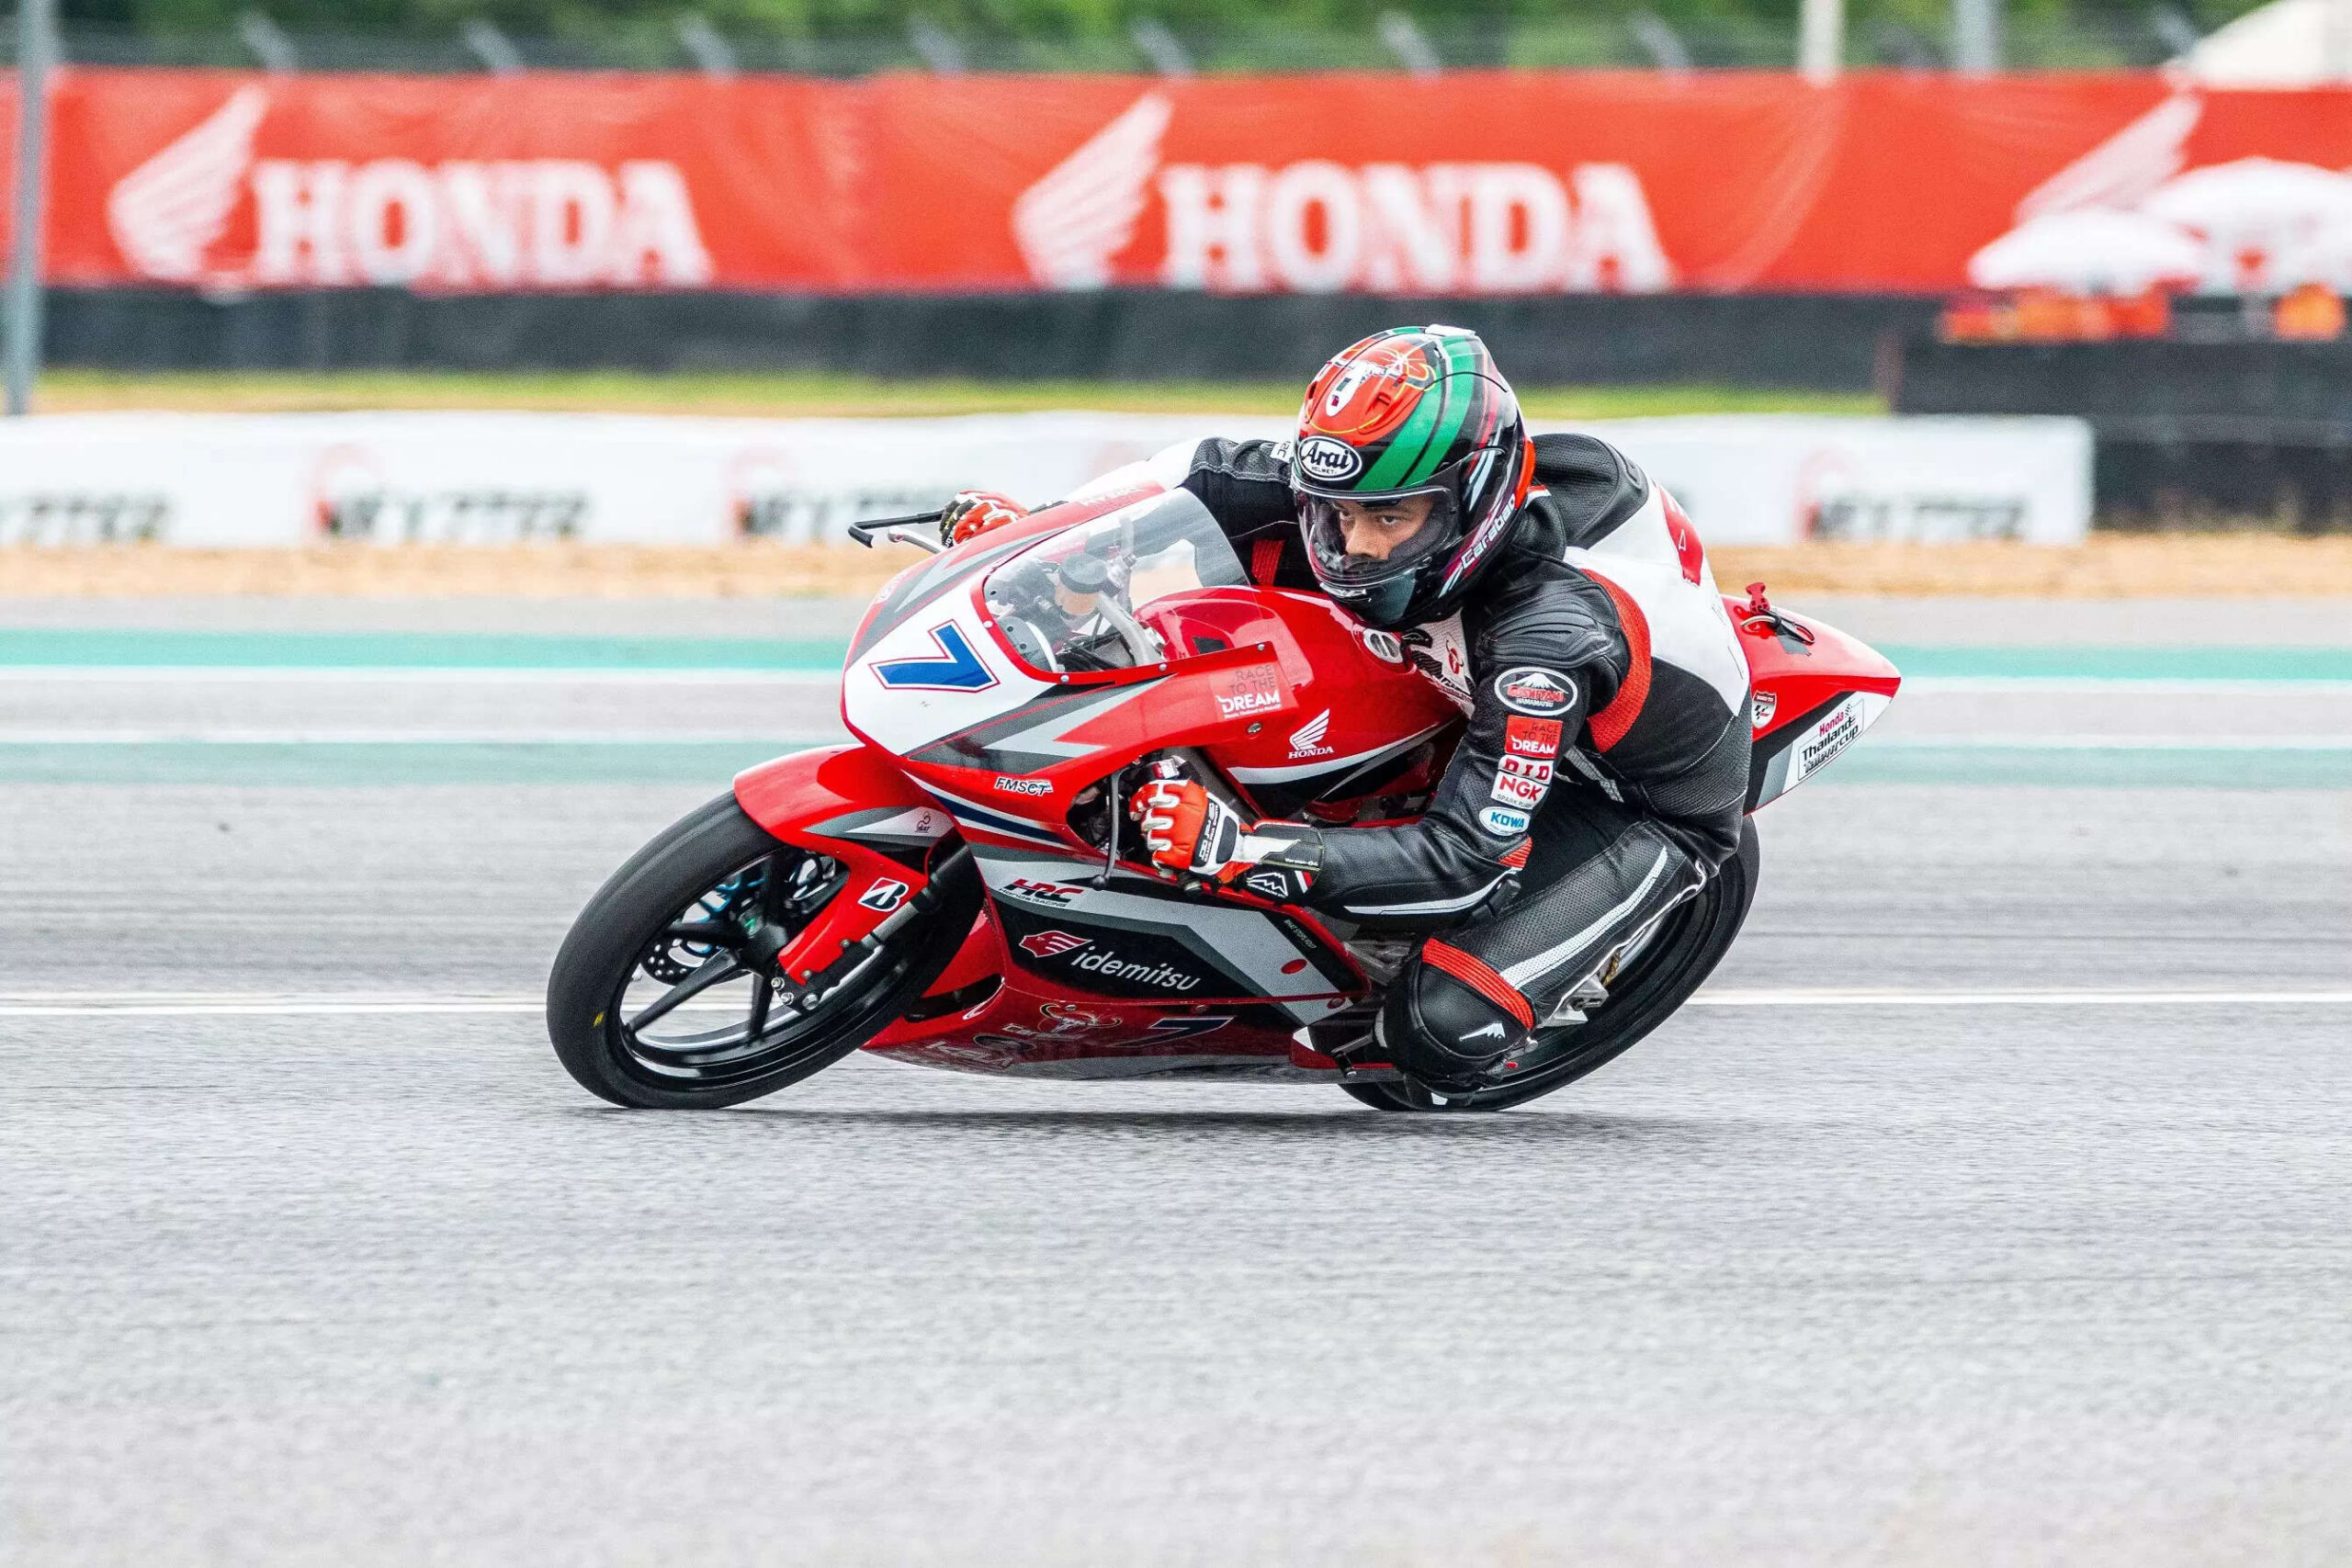 Sarthak Chavan Becomes the First Indian Racer to Qualify at Thailand Talent Cup